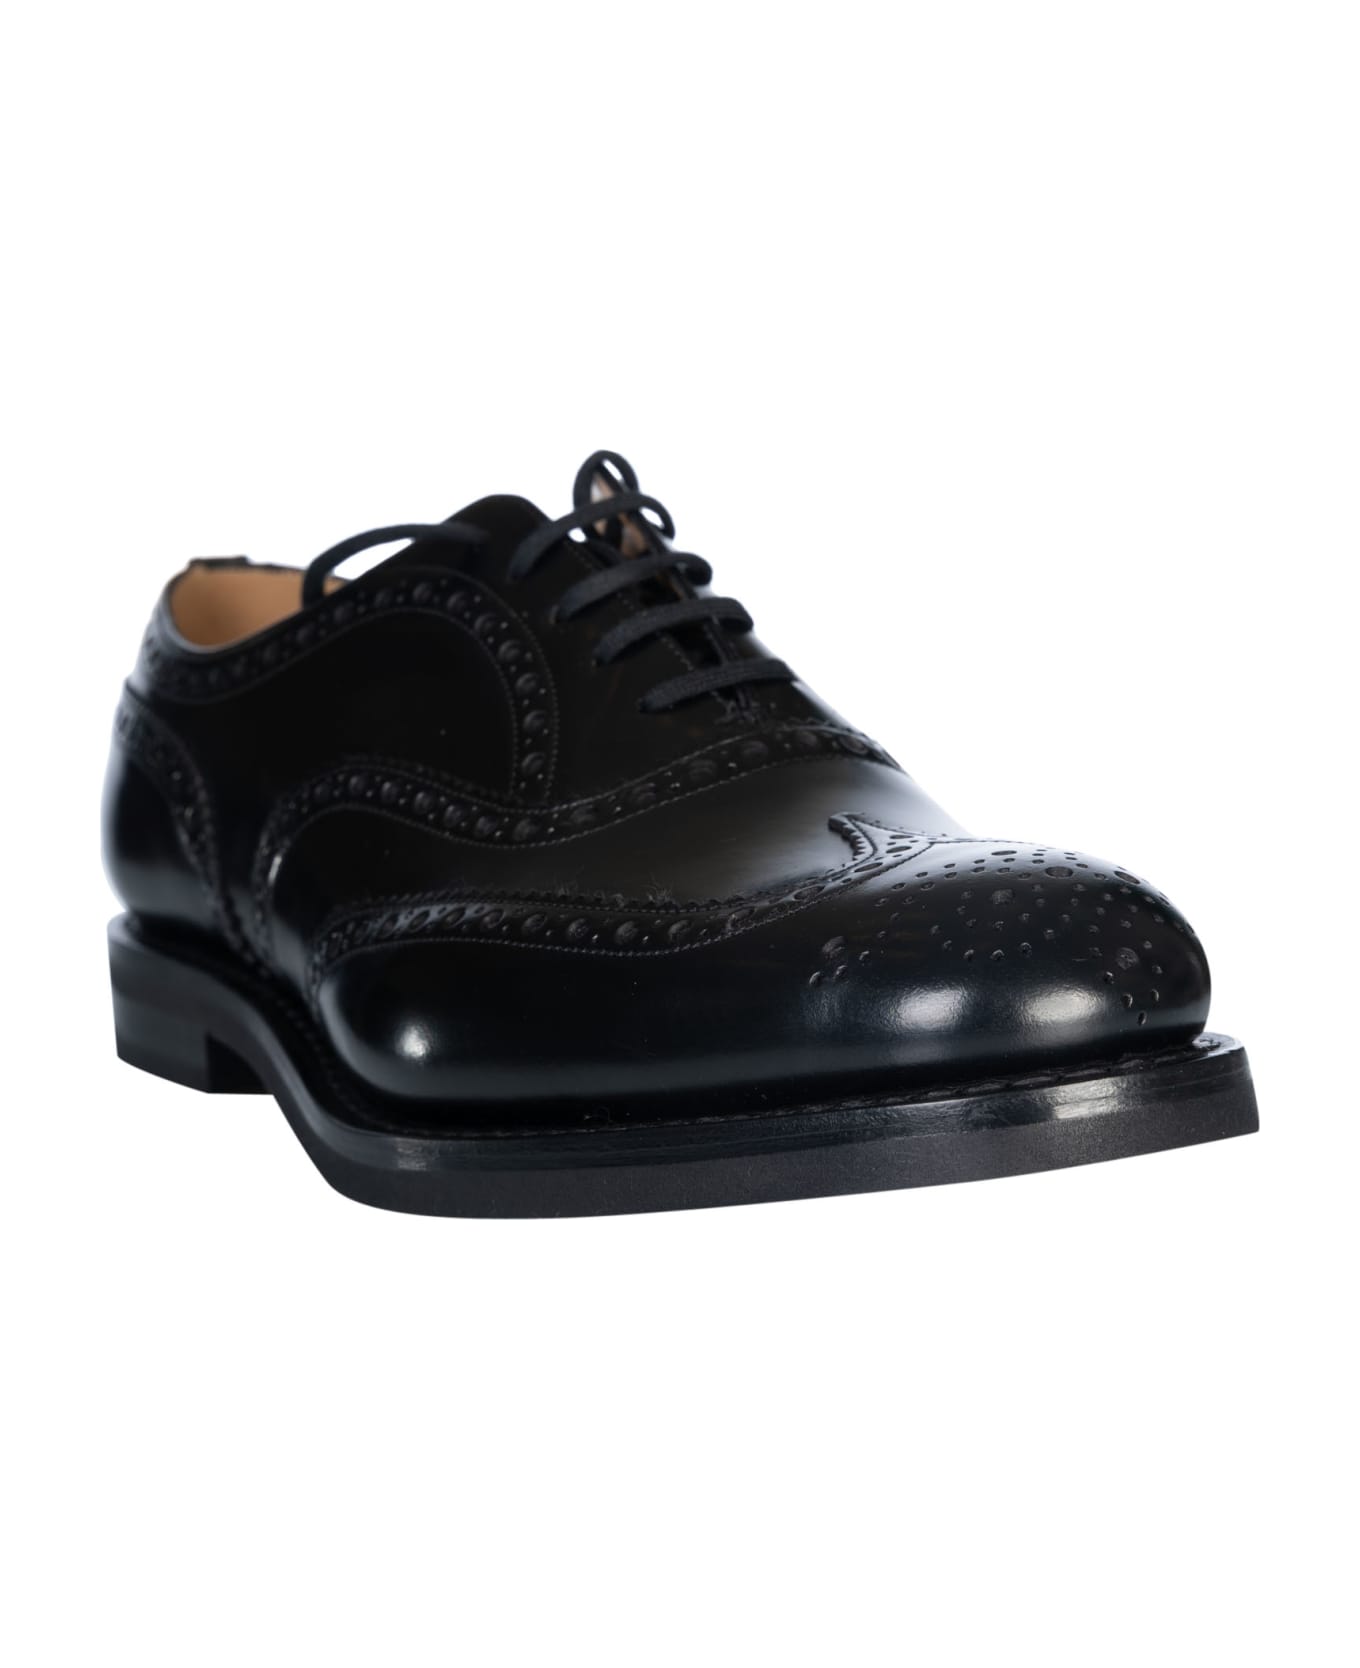 Church's Classic Lace-up Derby Innocence Shoes - Black